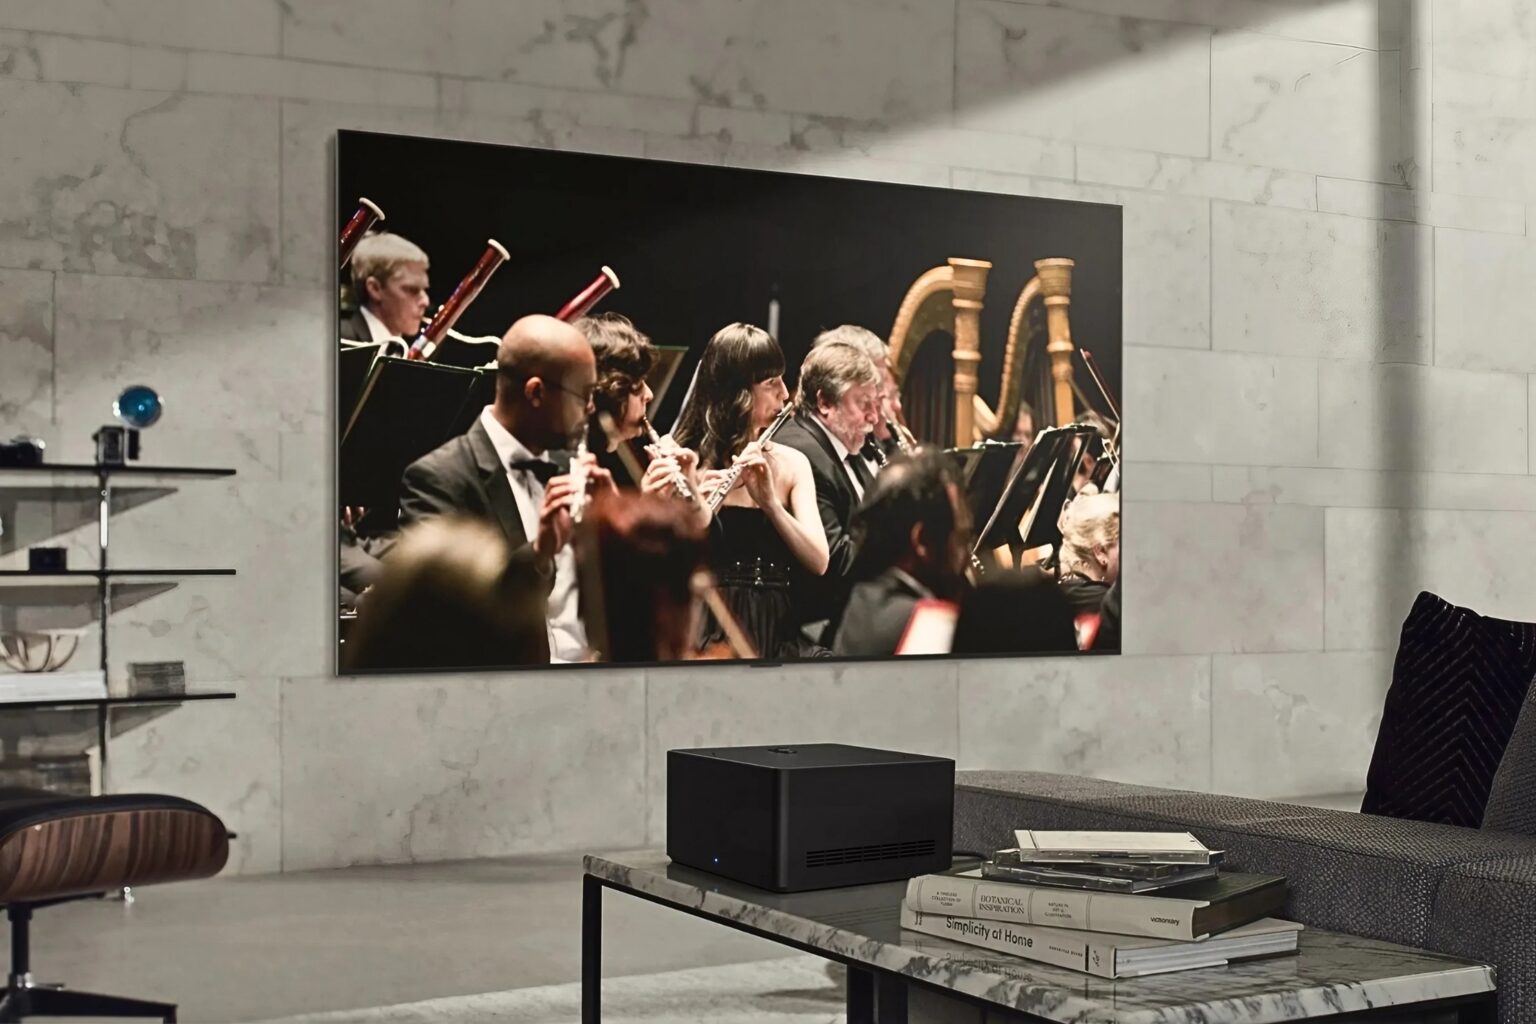 LG Launched new M-Series Wireless OLED TVs starting at $5,000